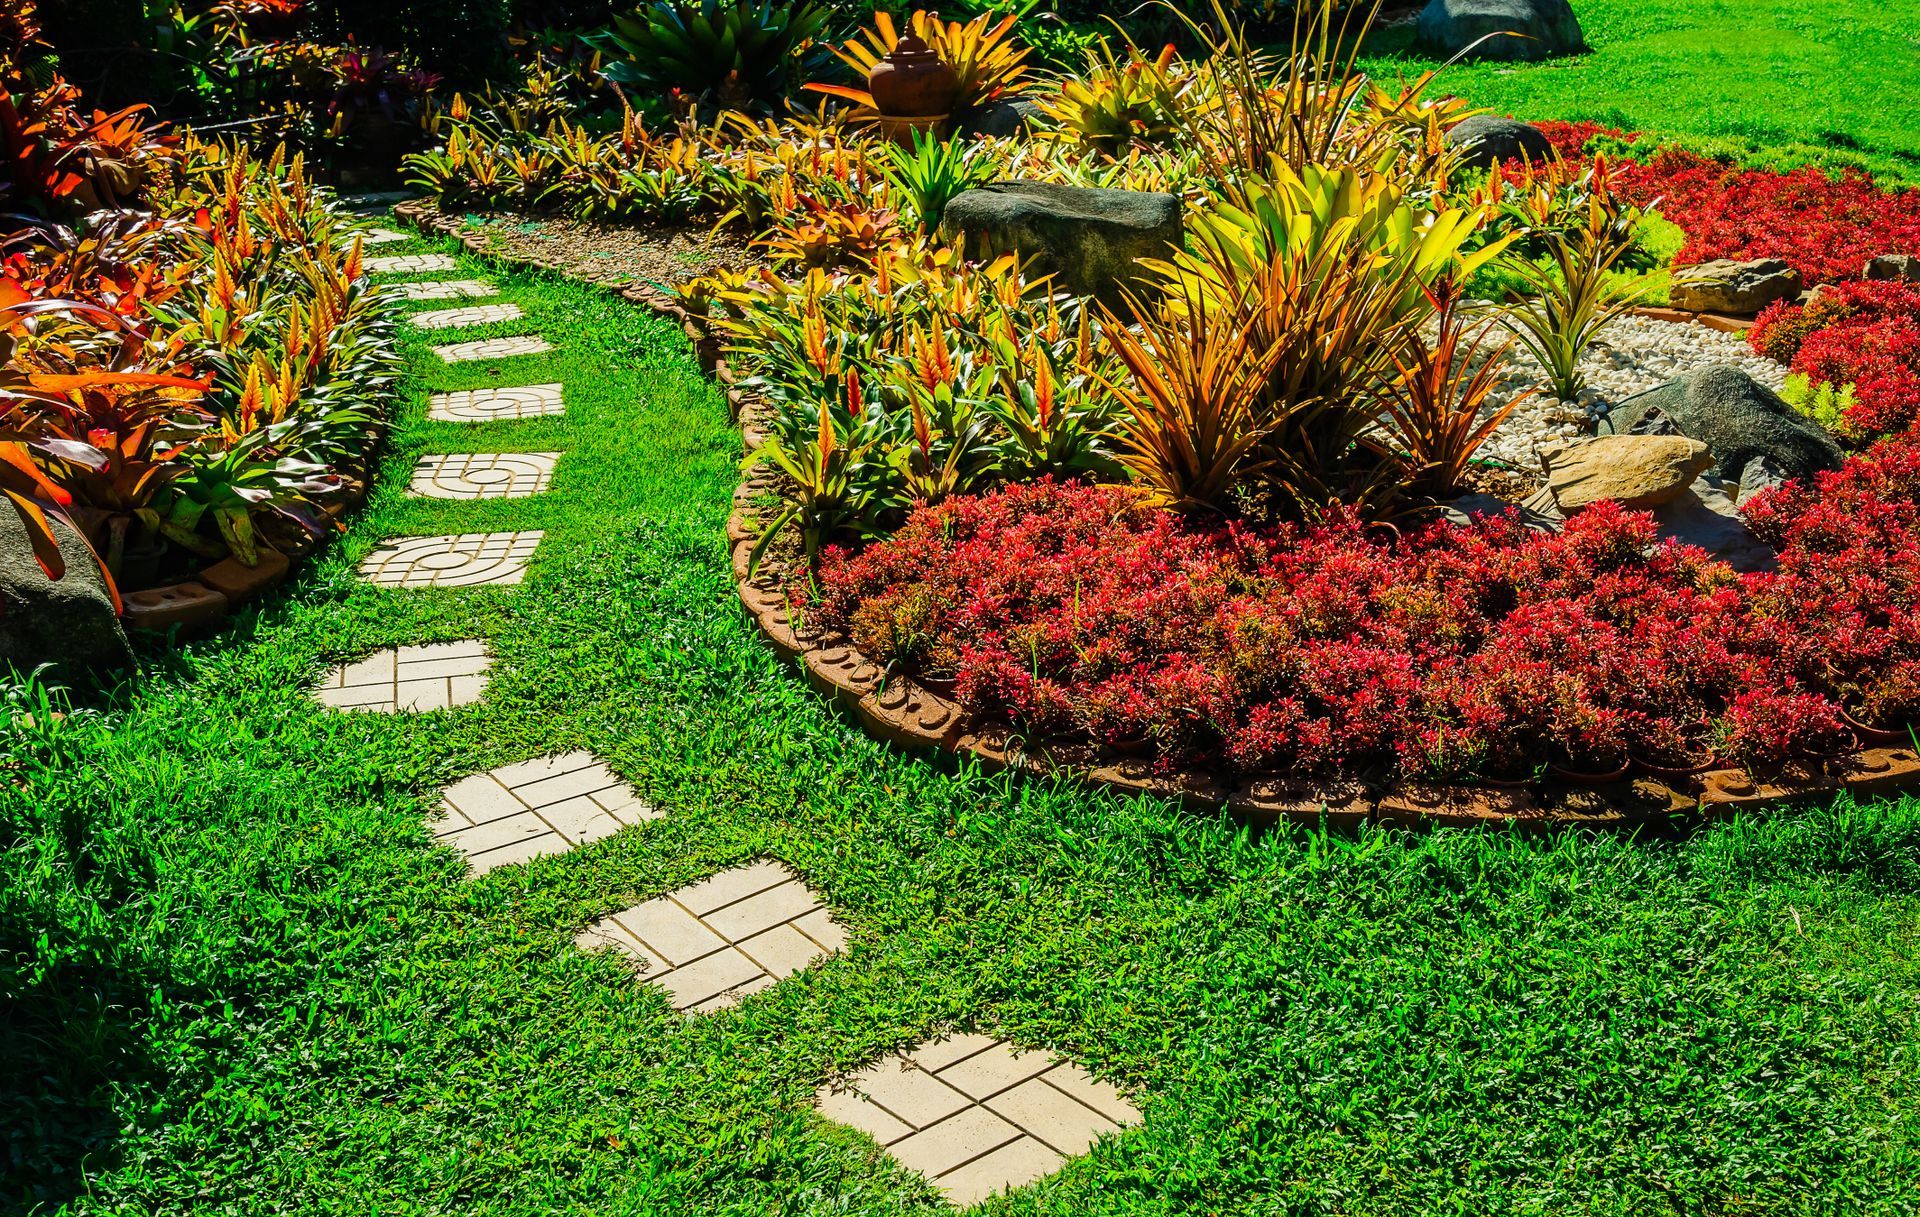 Garden landscape design with pathway intersecting bright green lawns and shrubs